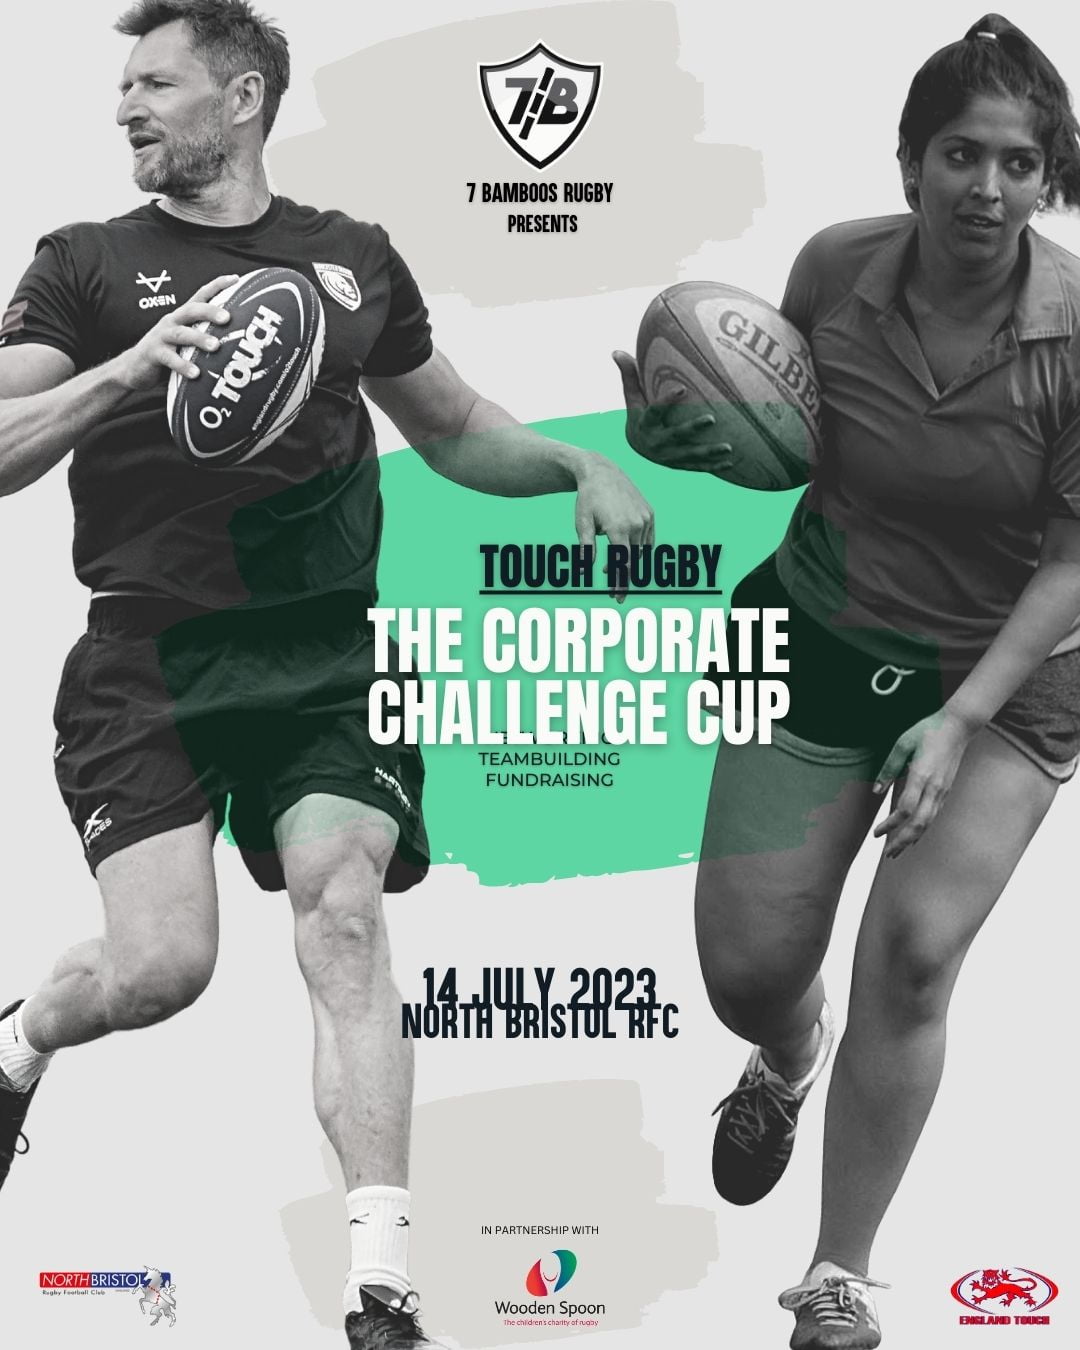 The Corporate Challenge Cup on 14 July 2023 at North Bristol RFC